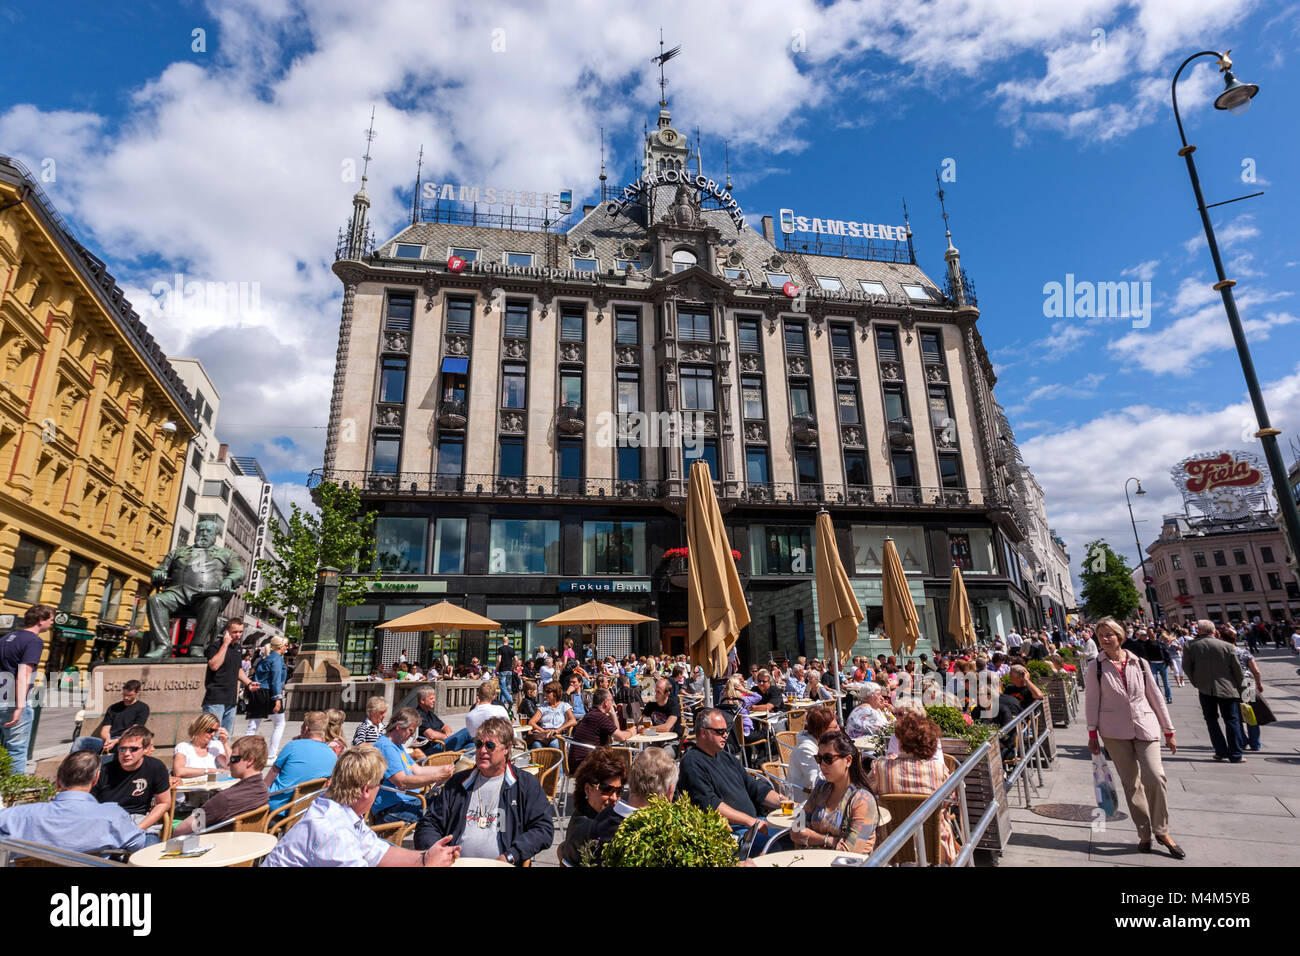 Sunny summer day with terrace full of people in front of Olav Thon Gruppen house, Karl Johans gate, Oslo, Norway Stock Photo